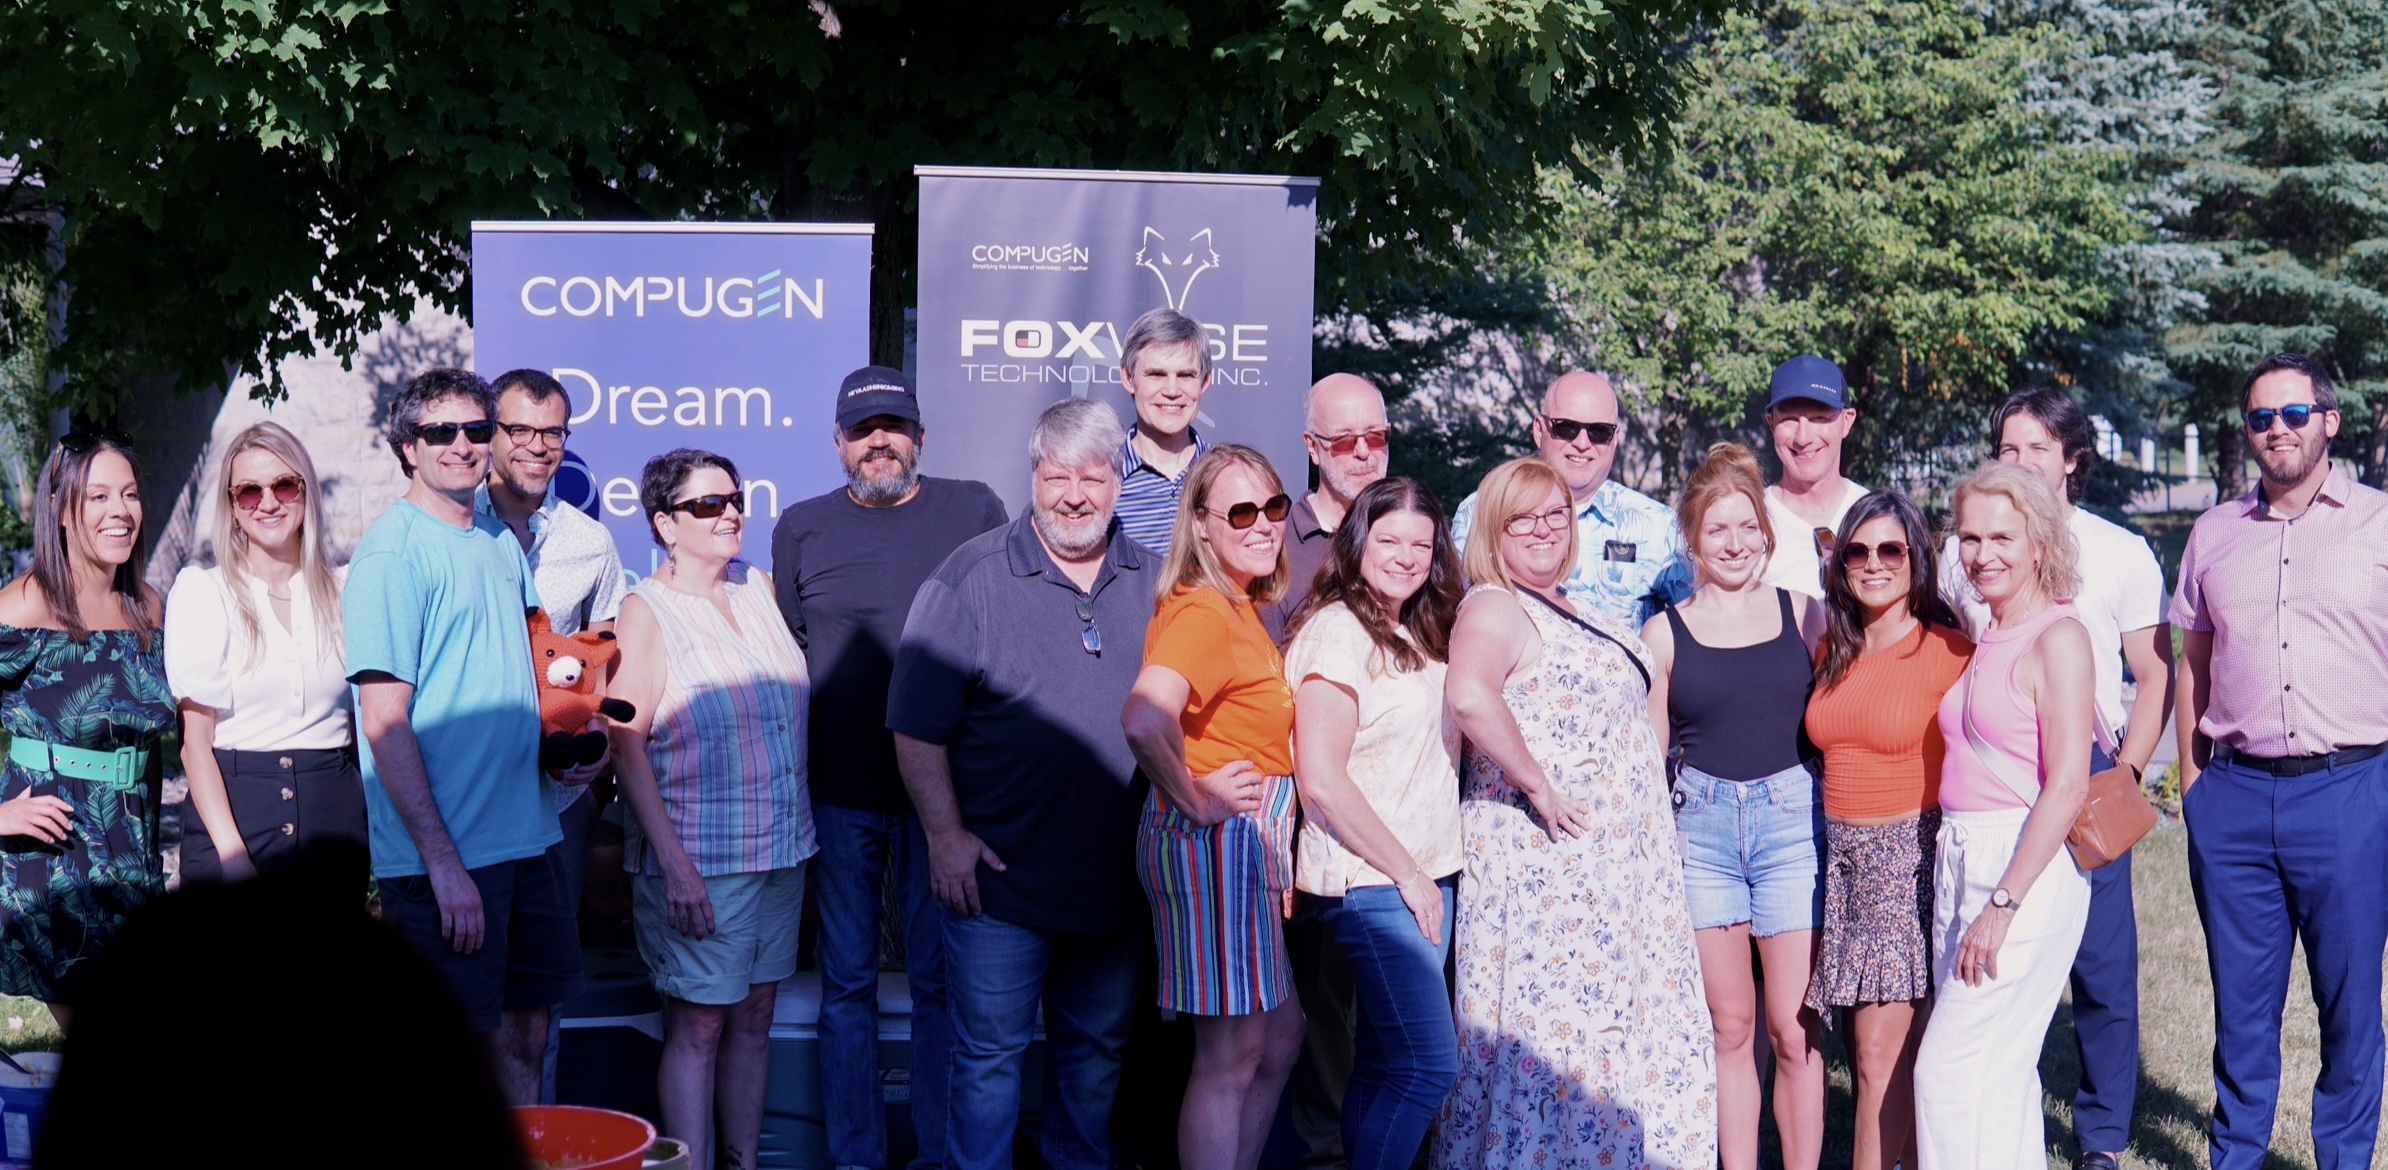 A group shot of the Foxwise team.